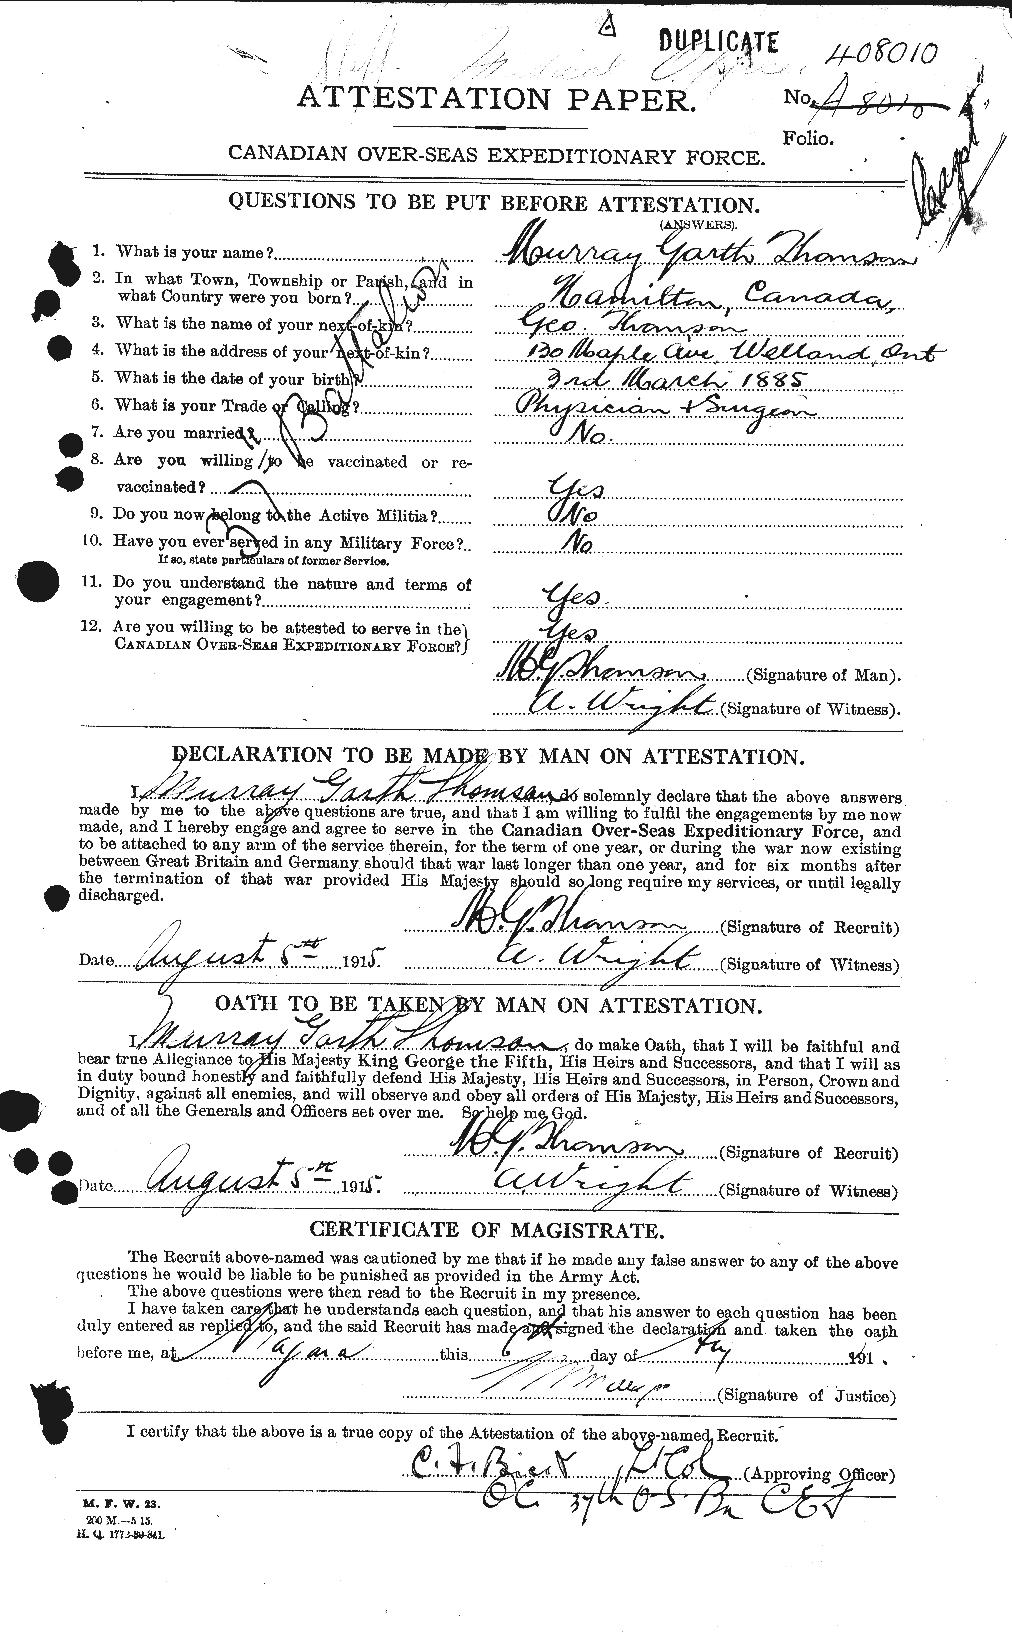 Personnel Records of the First World War - CEF 633460a